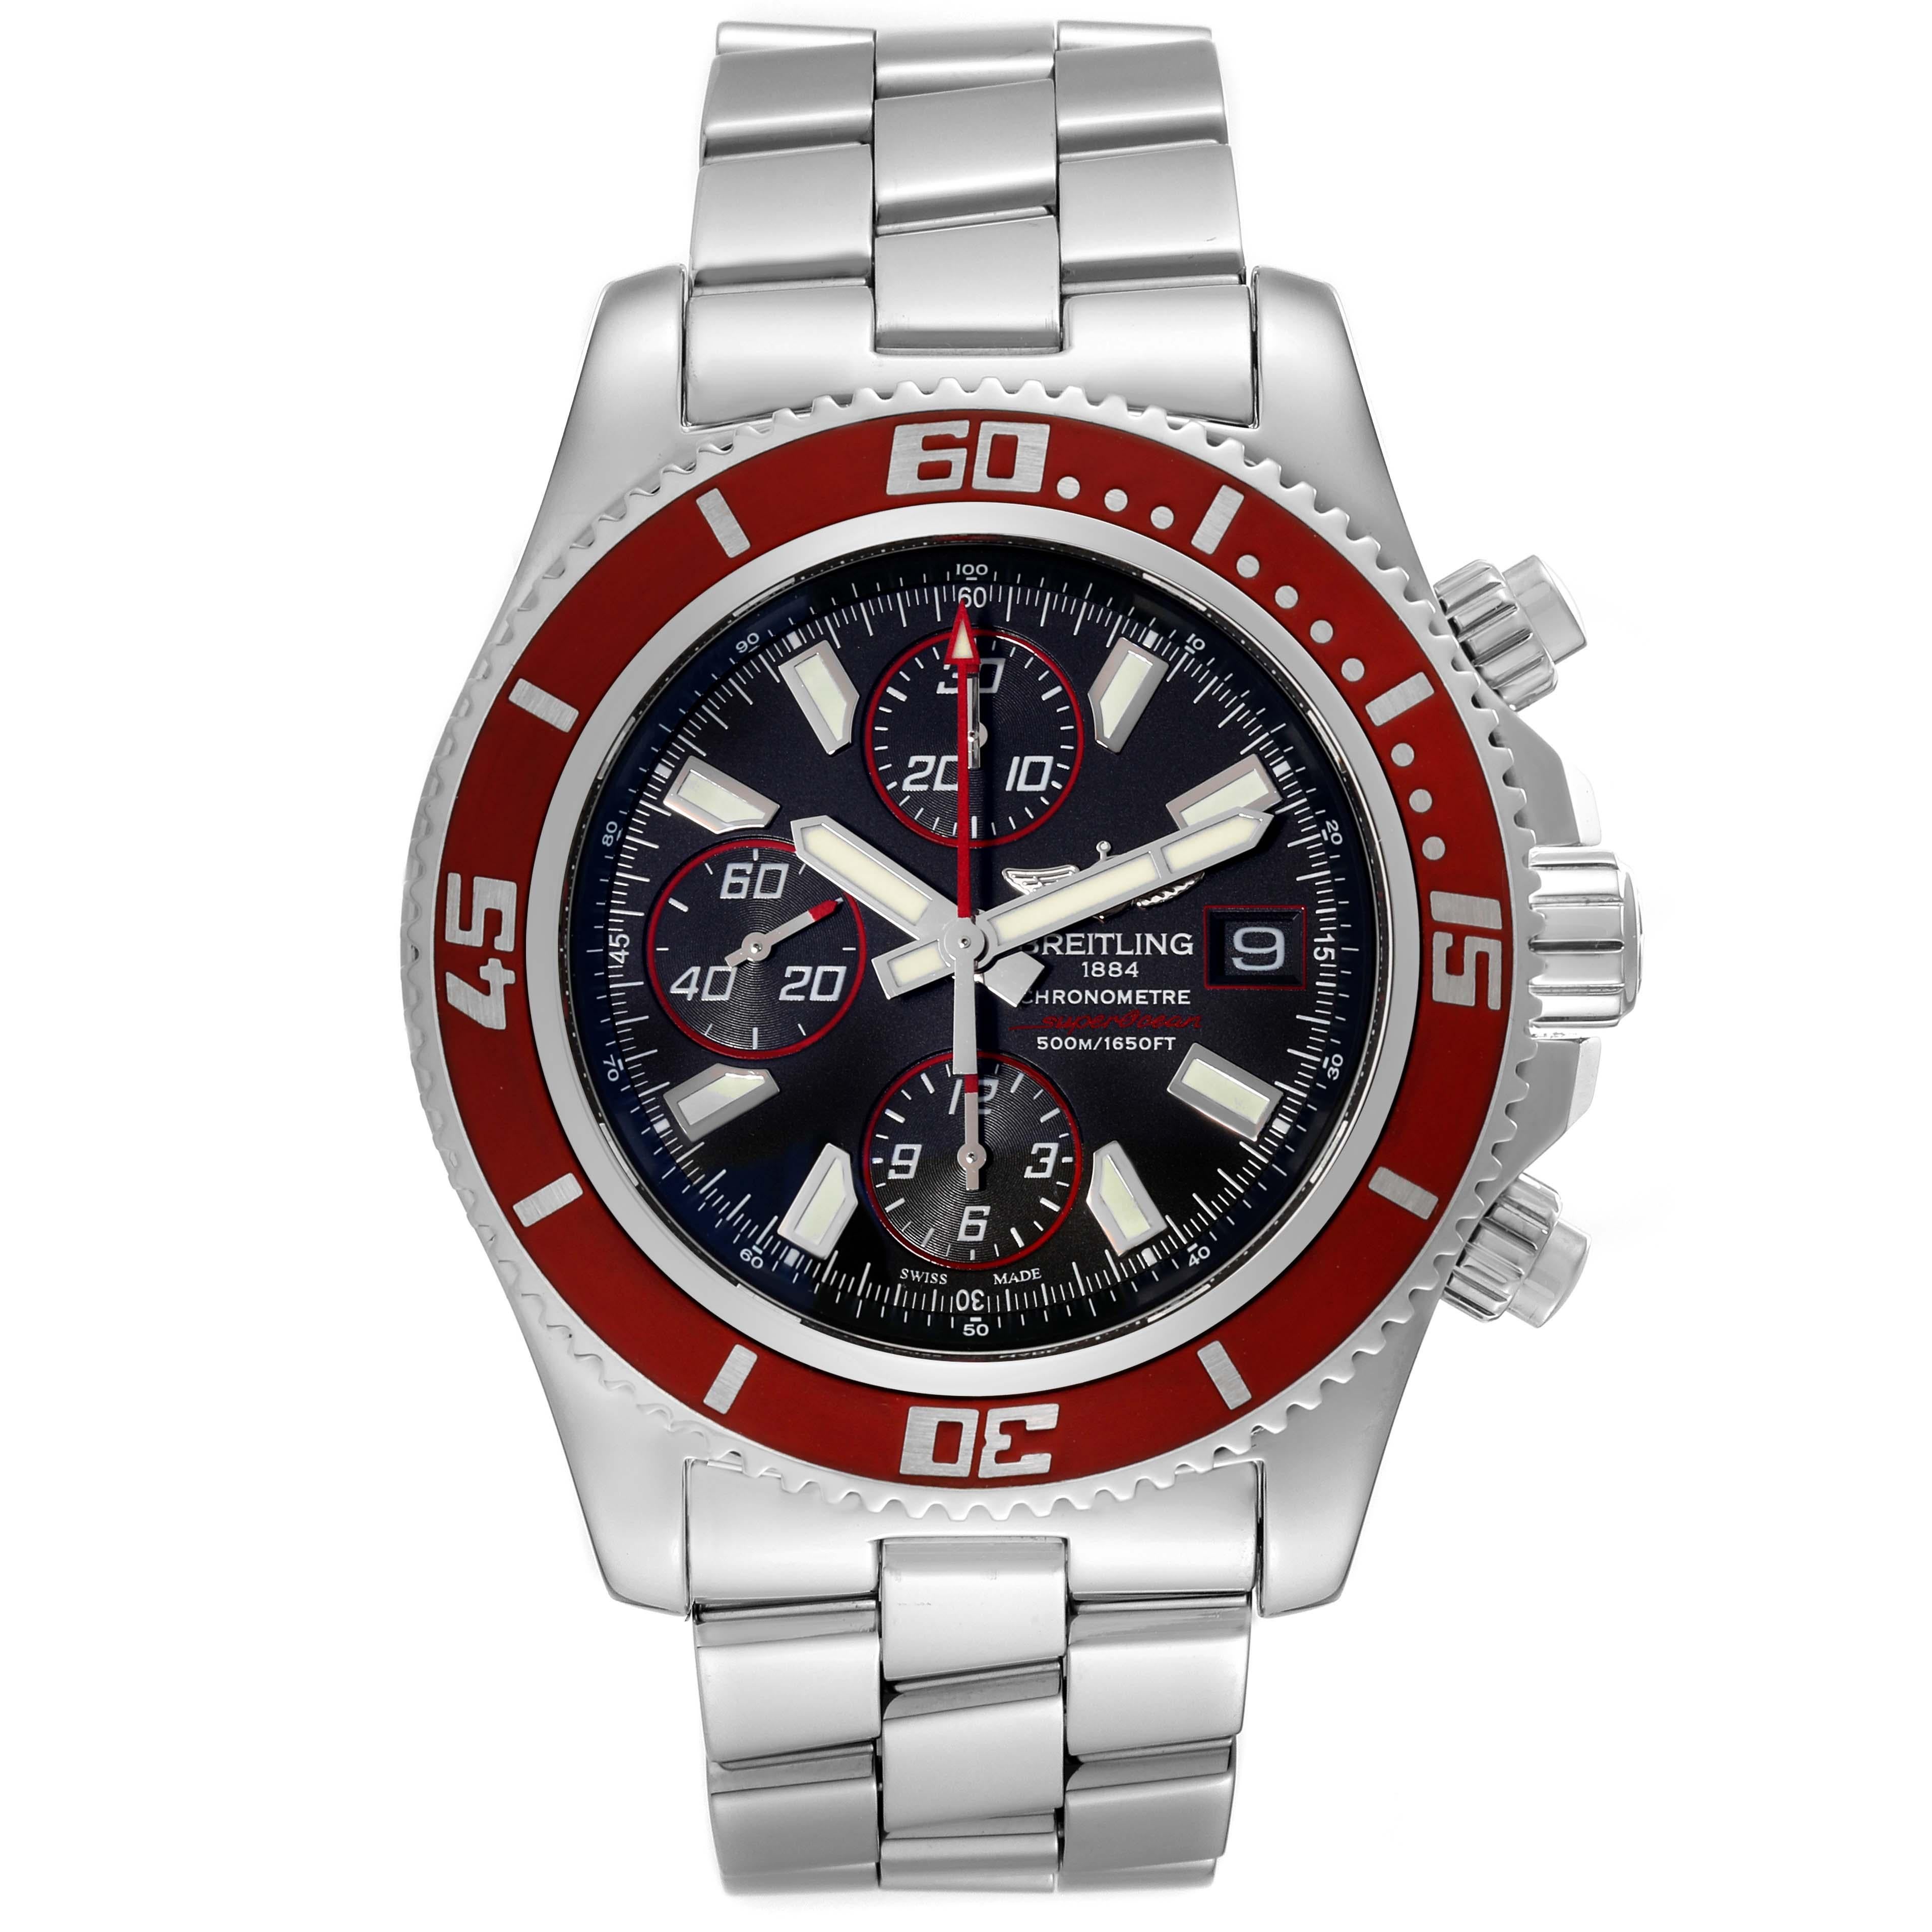 Men's Breitling Aeromarine SuperOcean II Red Bezel Limited Edition Mens Watch A13341 For Sale